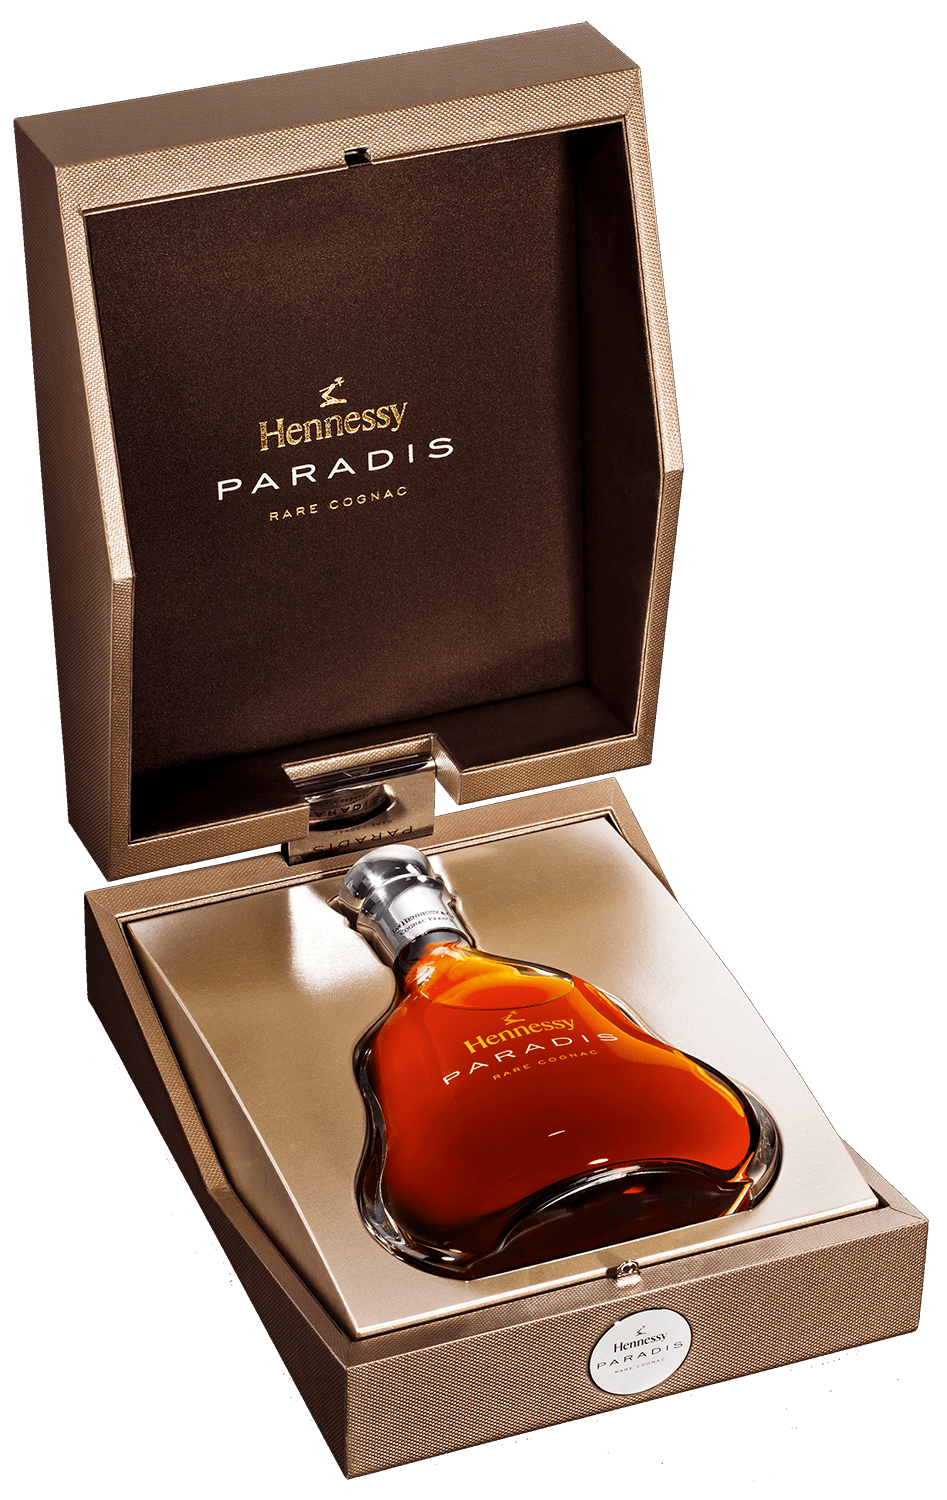 Hennessy Paradis Cognac (gift box) hennessy cognac vs gift box with 2 glasses